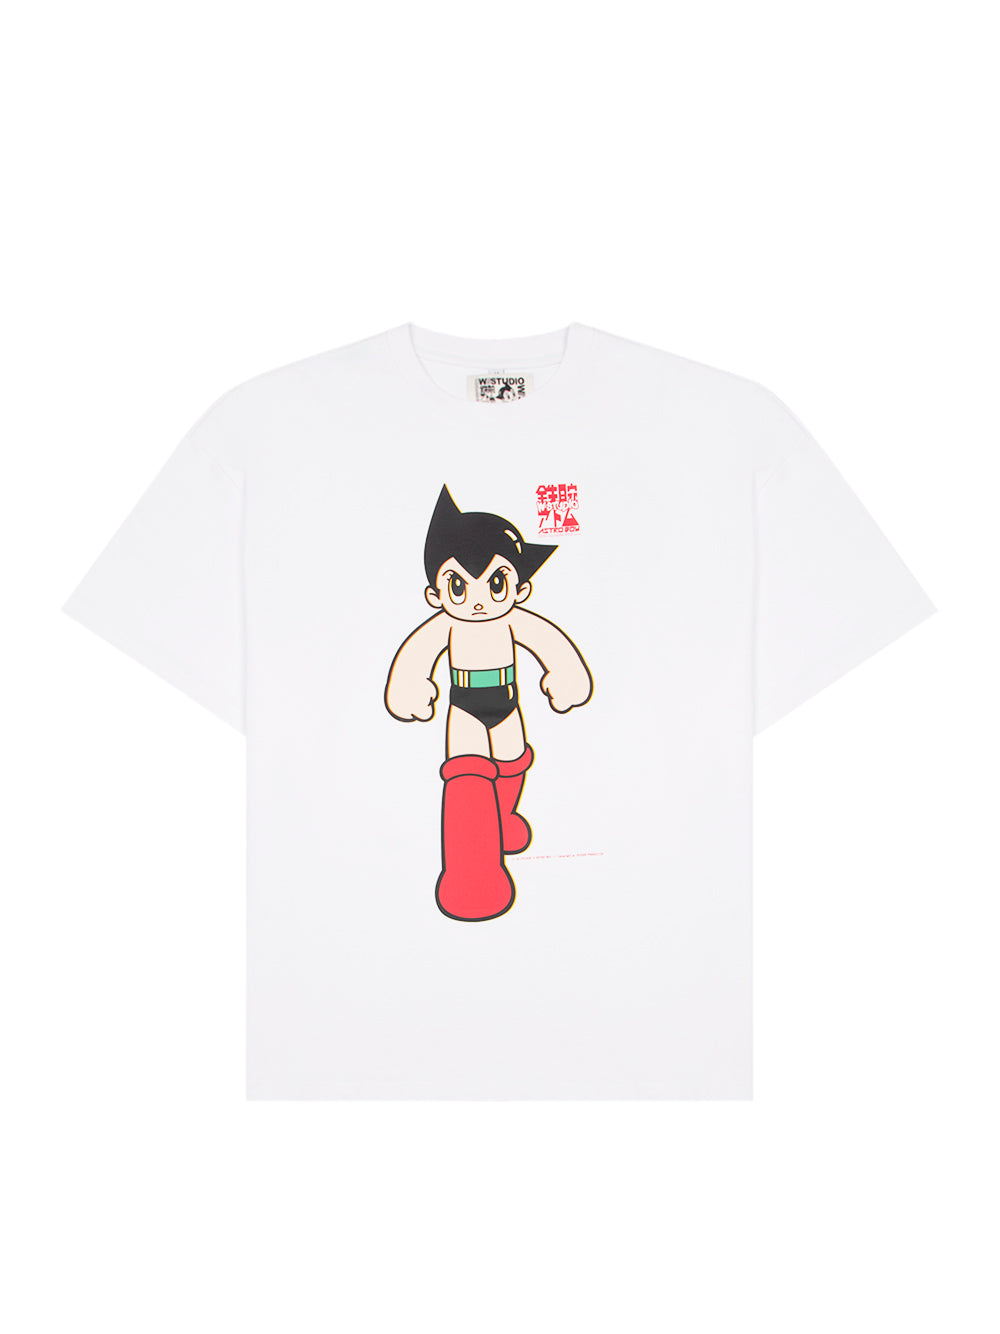 T-Shirt Astro Boy Red Boots (White)